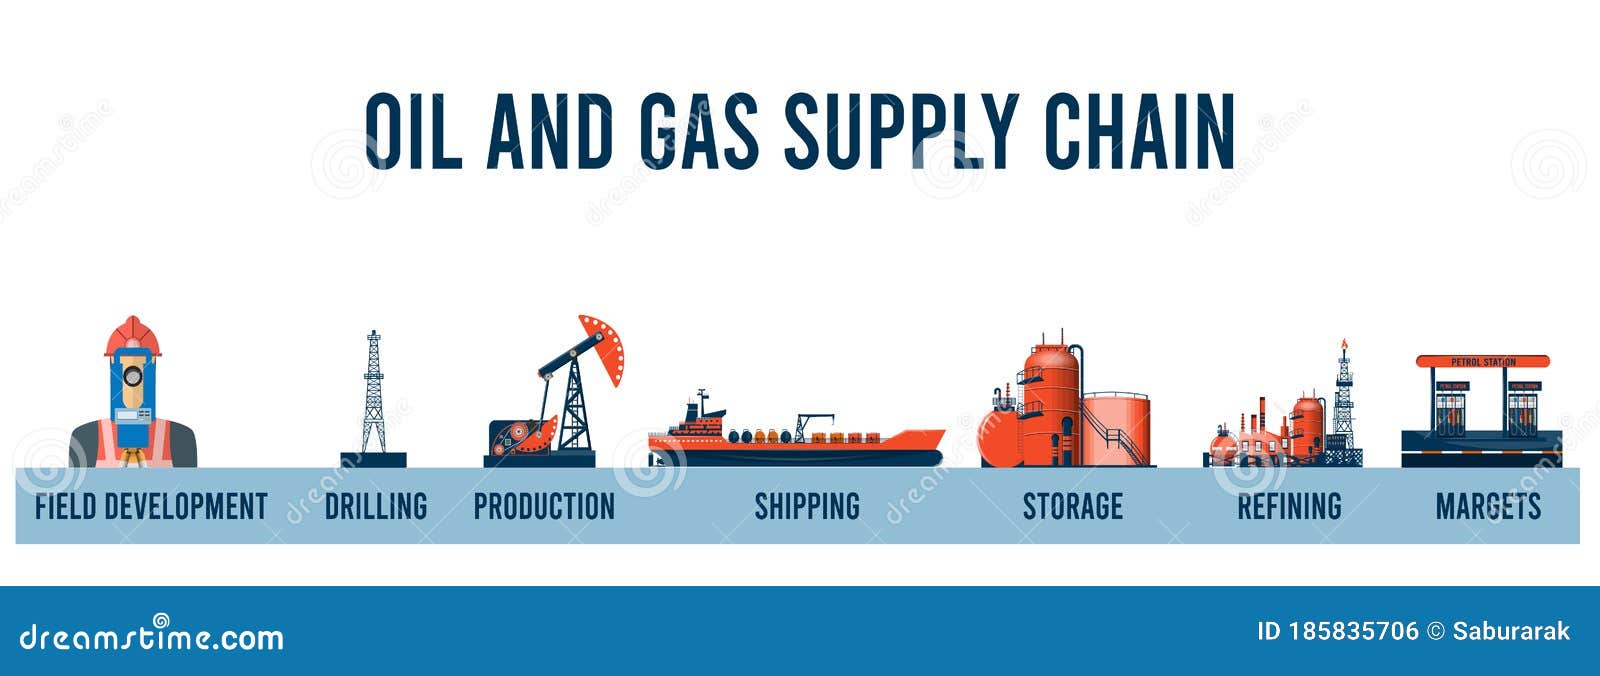 oil and gas supply chain infographic.  